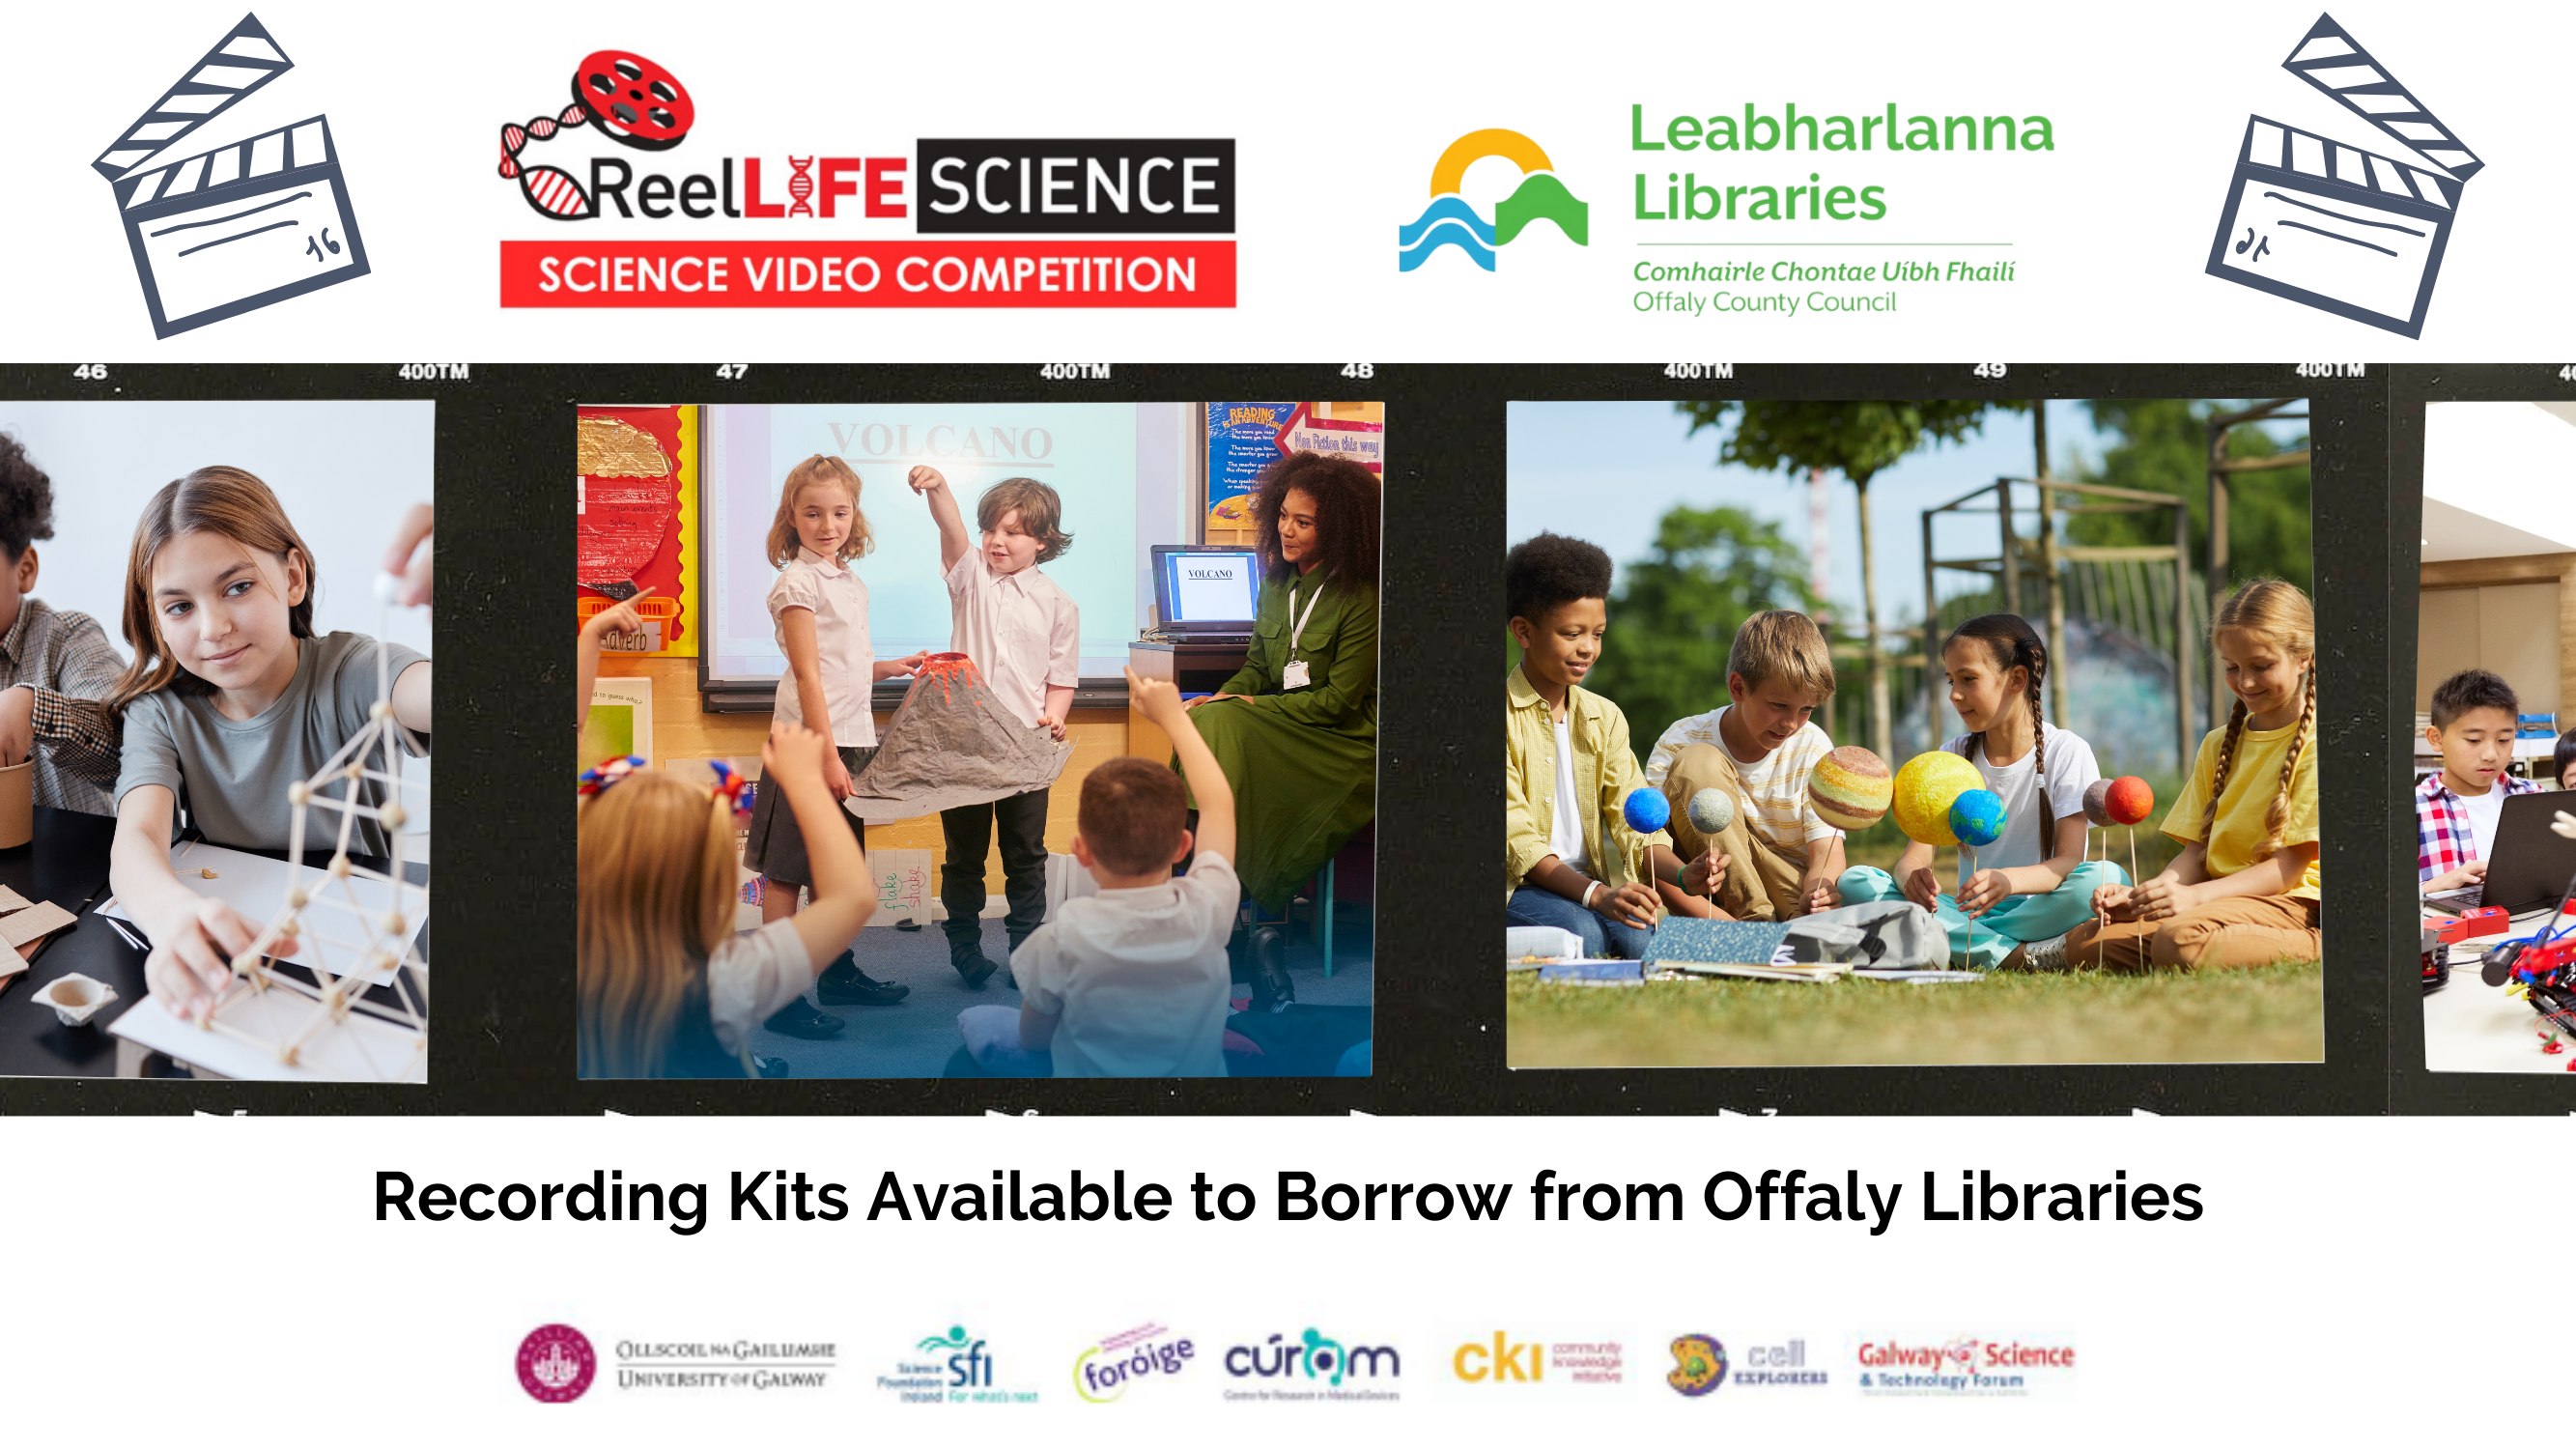 Offaly Libraries collaborate with ReelLIFE Science on Exciting